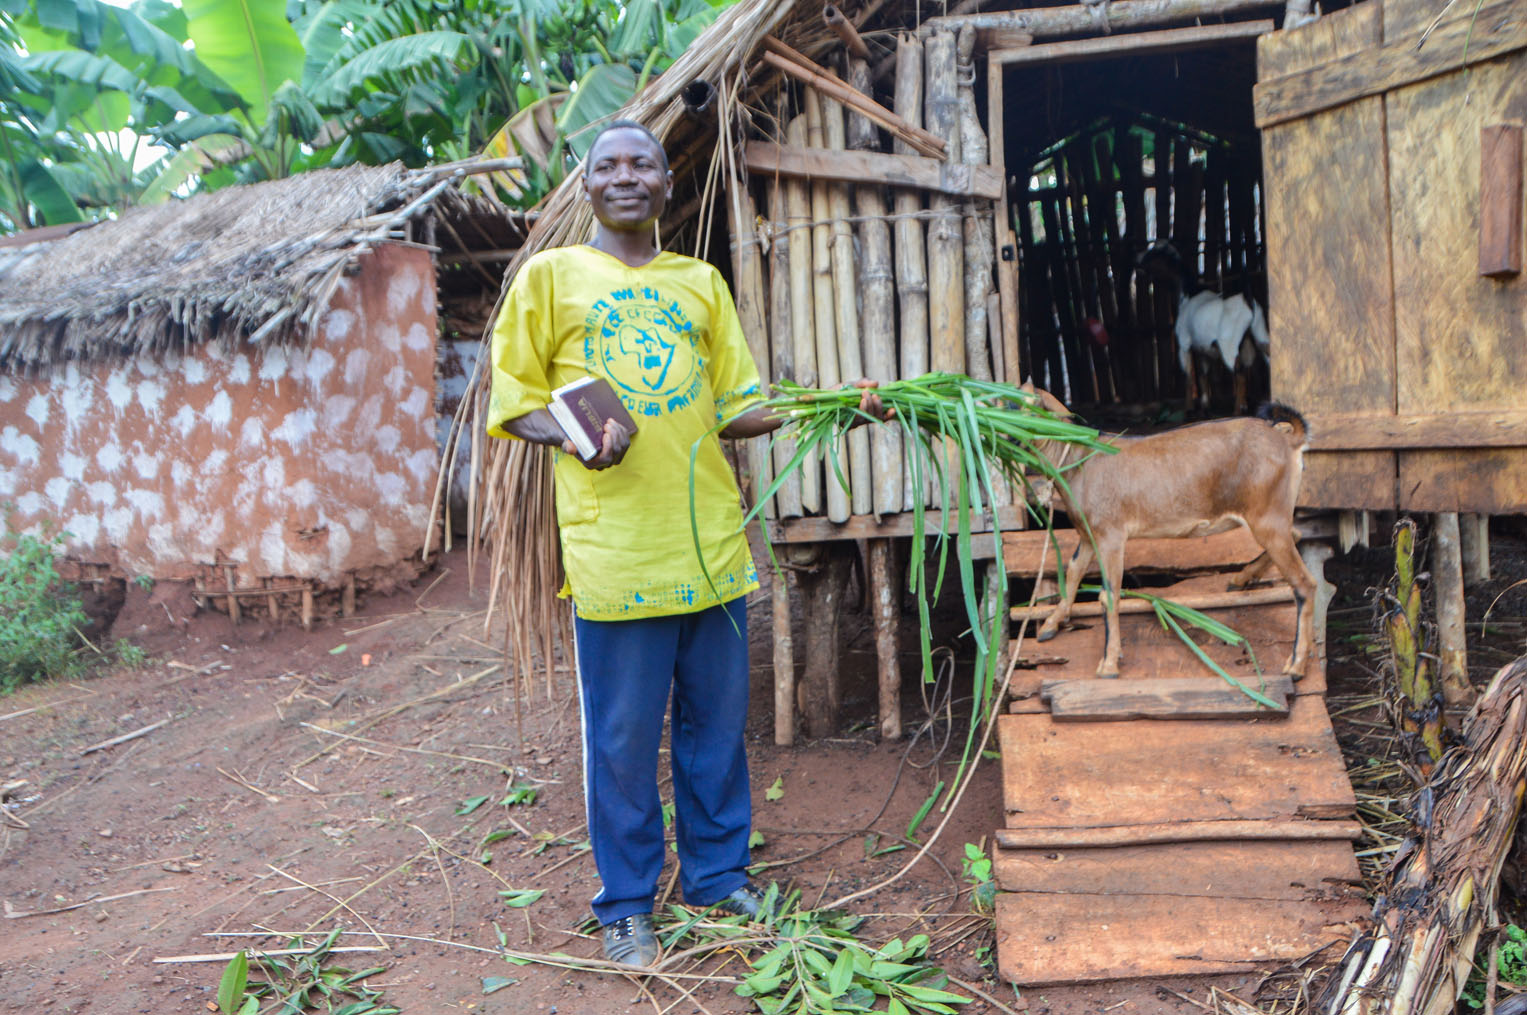 Through the goats provided by Samaritan's Purse, families are seeing the fruit of their labor paying off in food sources and economic opportunity.